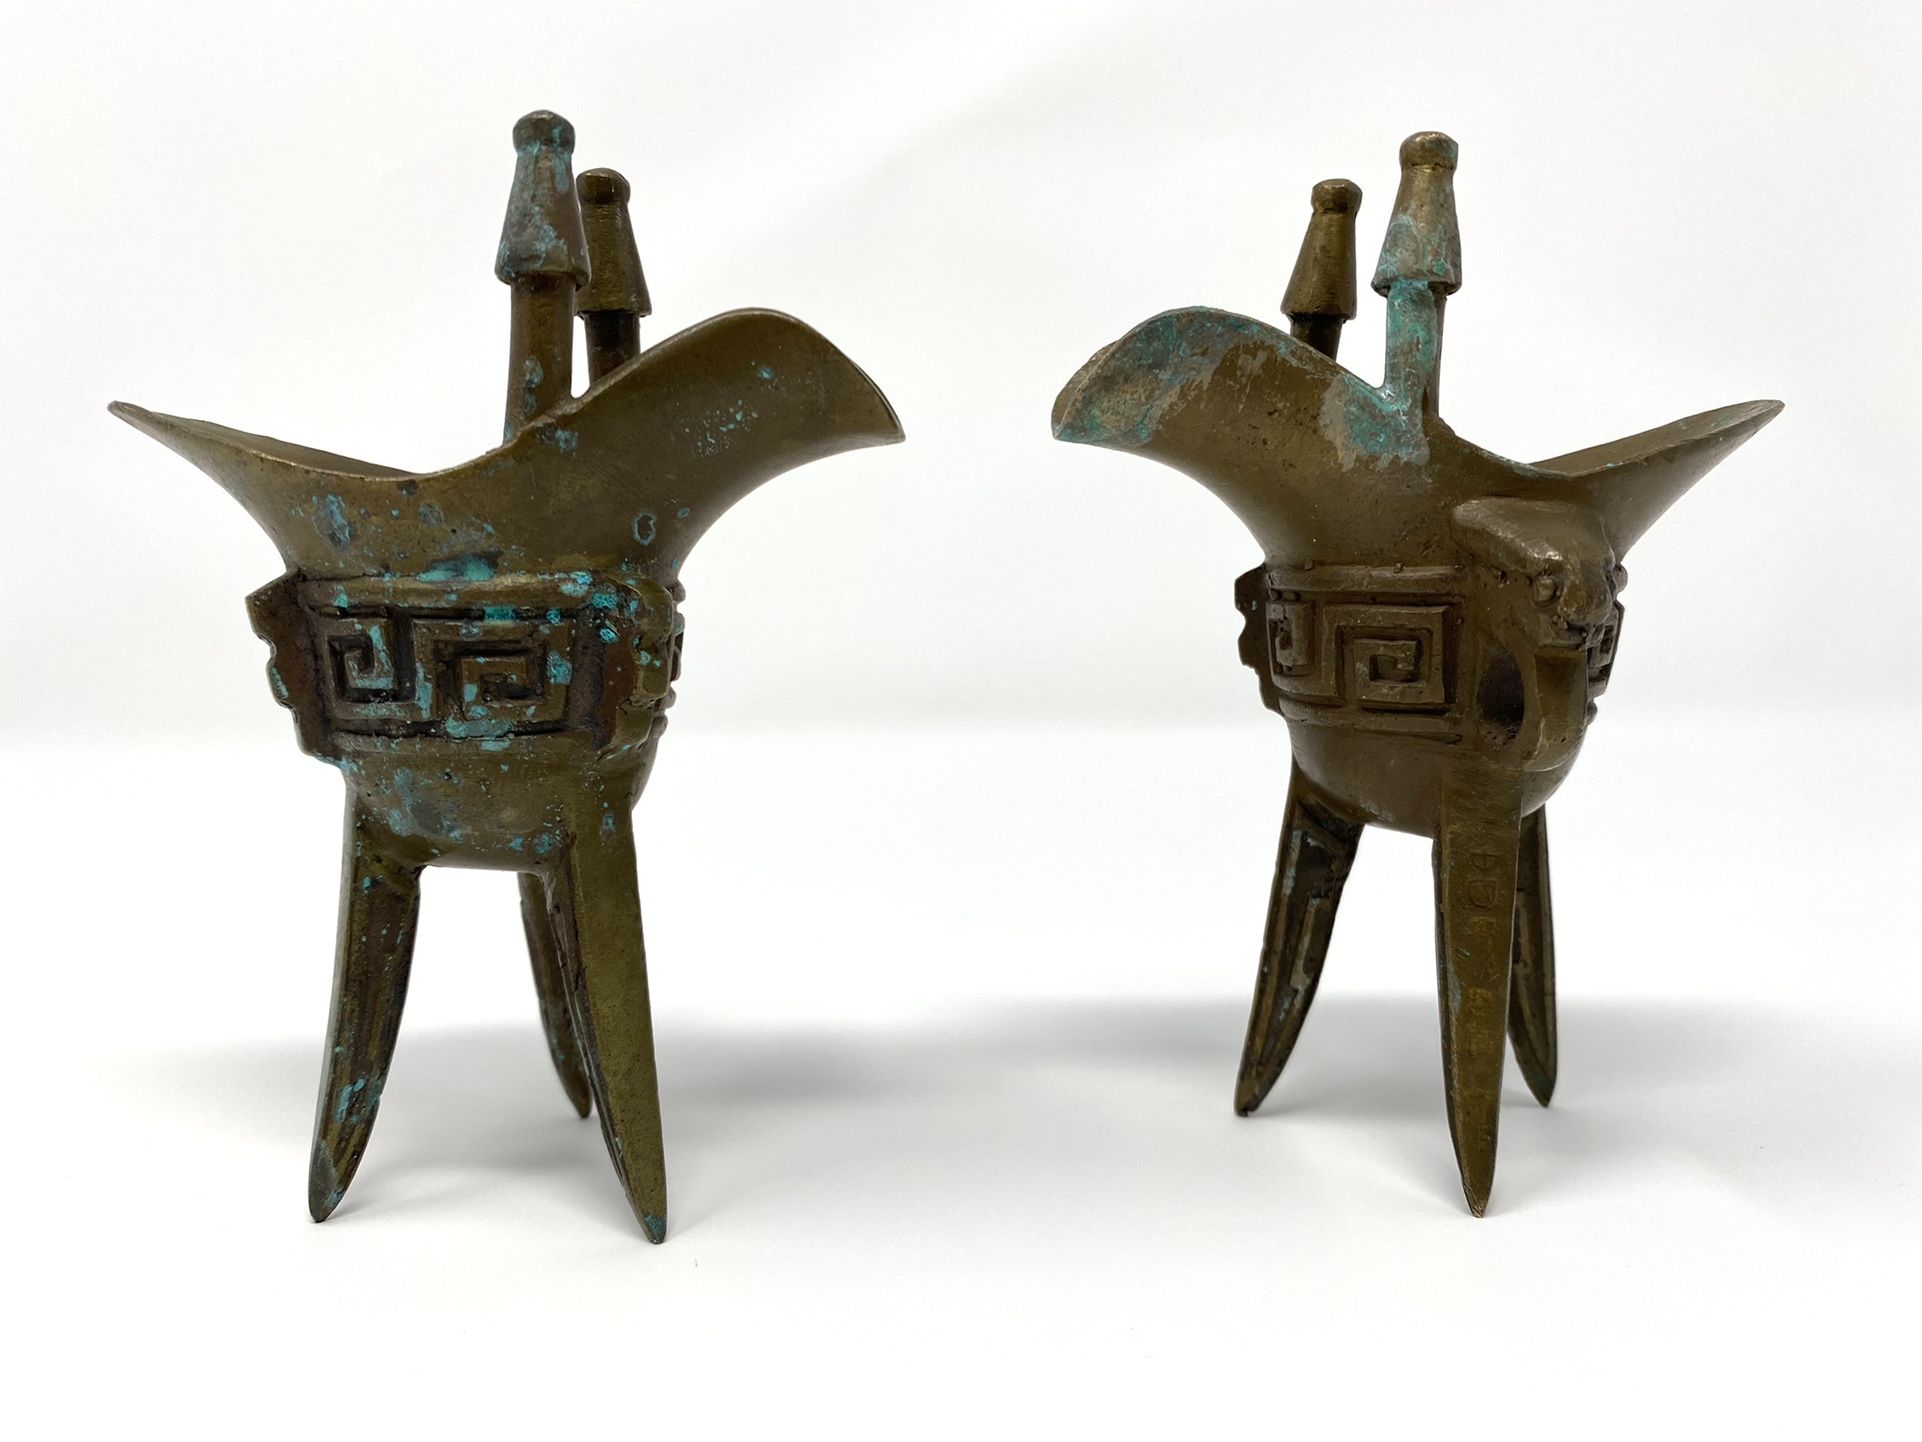  Antique  Brass Chinese Jue  Ceremonial Wine Cups